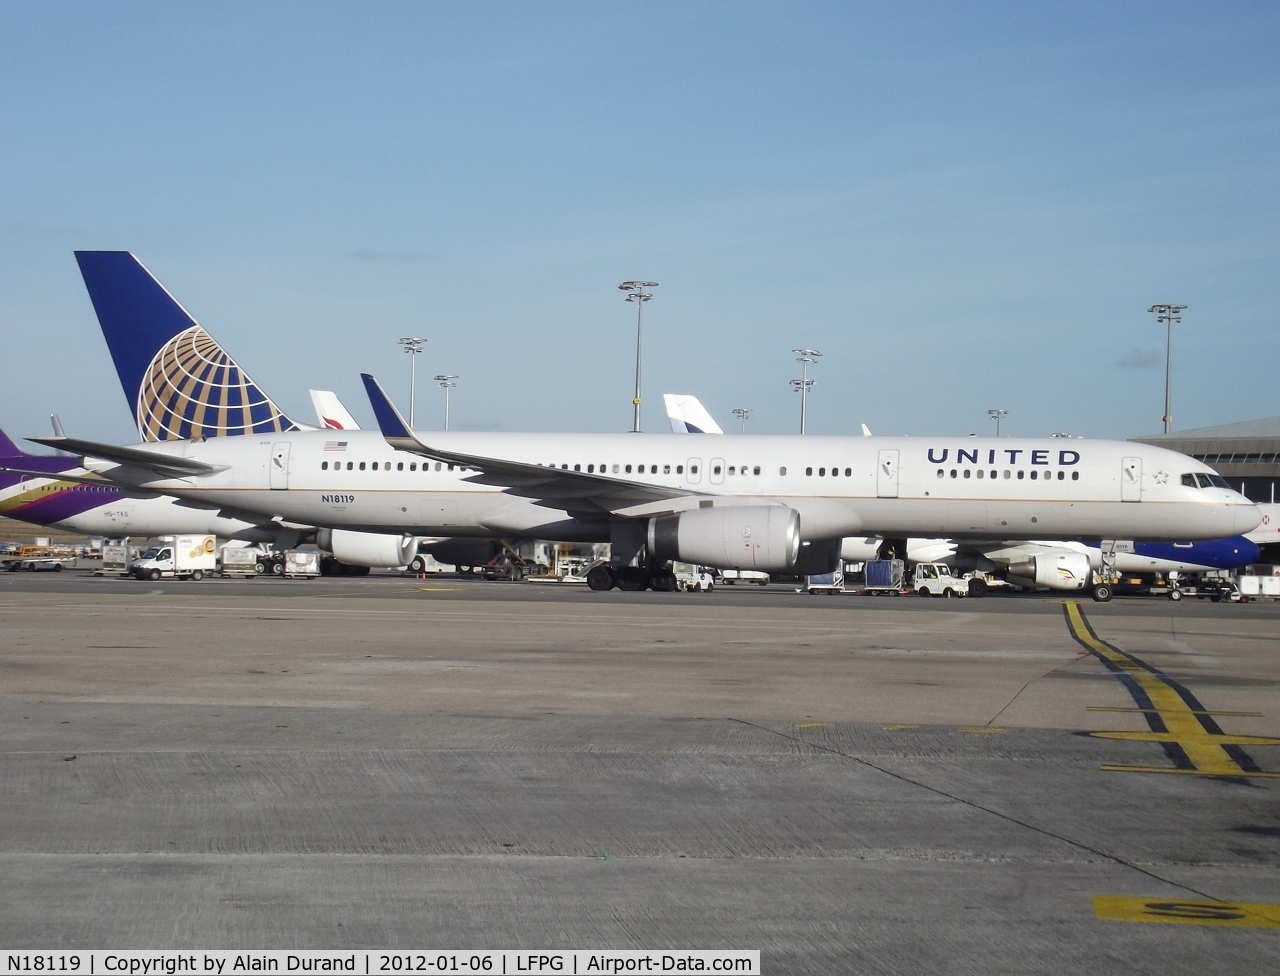 N18119, 1997 Boeing 757-224 C/N 27561, United was set to add the Economy Premium section in c/n 753 when the picture was made. Config now stands as C16W45Y108.